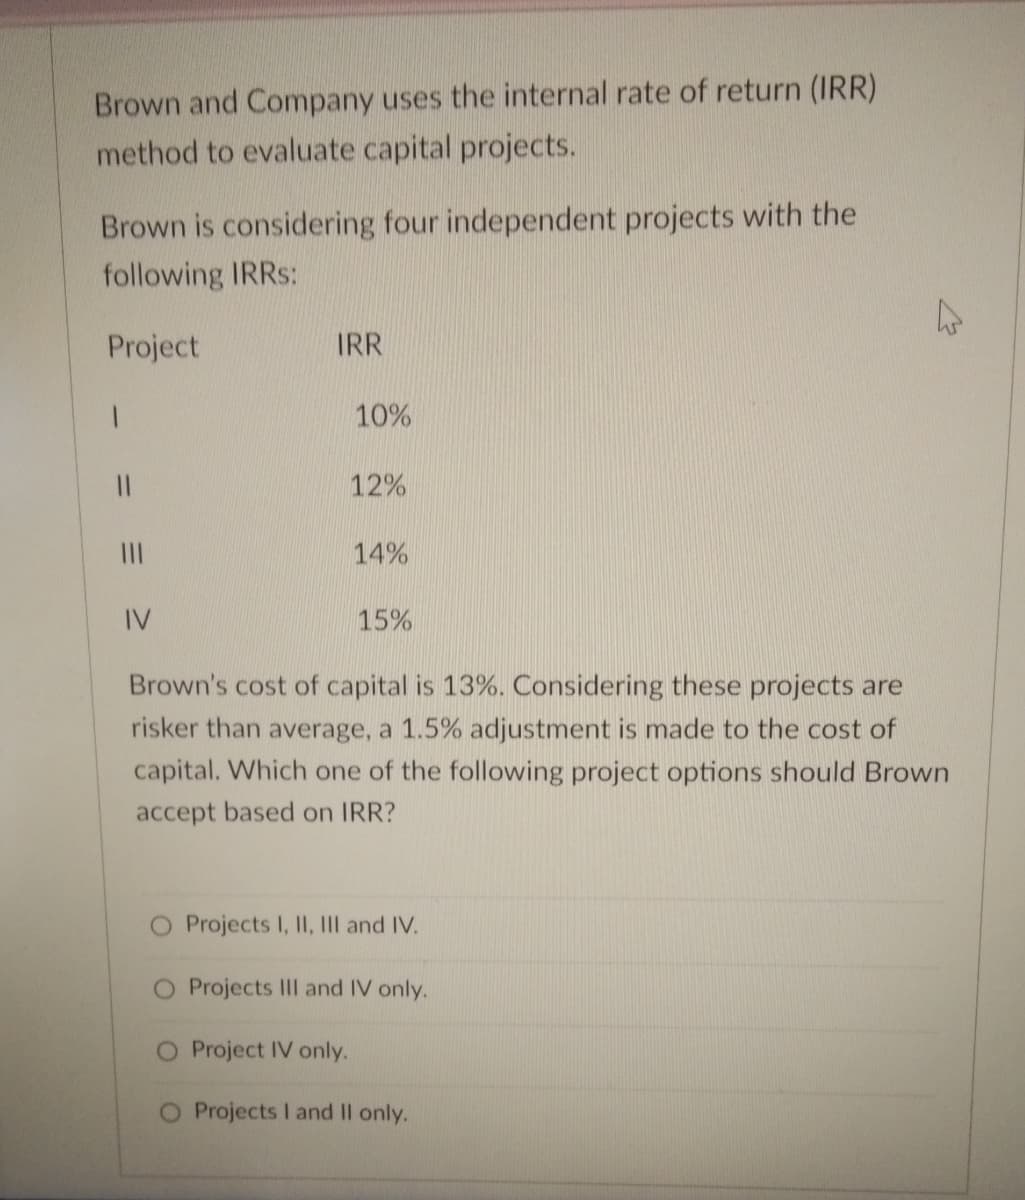 Brown and Company uses the internal rate of return (IRR)
method to evaluate capital projects.
Brown is considering four independent projects with the
following IRRS:
Project
IRR
10%
12%
II
14%
IV
15%
Brown's cost of capital is 13%. Considering these projects are
risker than average, a 1.5% adjustment is made to the cost of
capital. Which one of the following project options should Brown
accept based on IRR?
Projects I, II, IIl and IV.
O Projects II and IV only.
O Project IV only.
Projects I and Il only.
